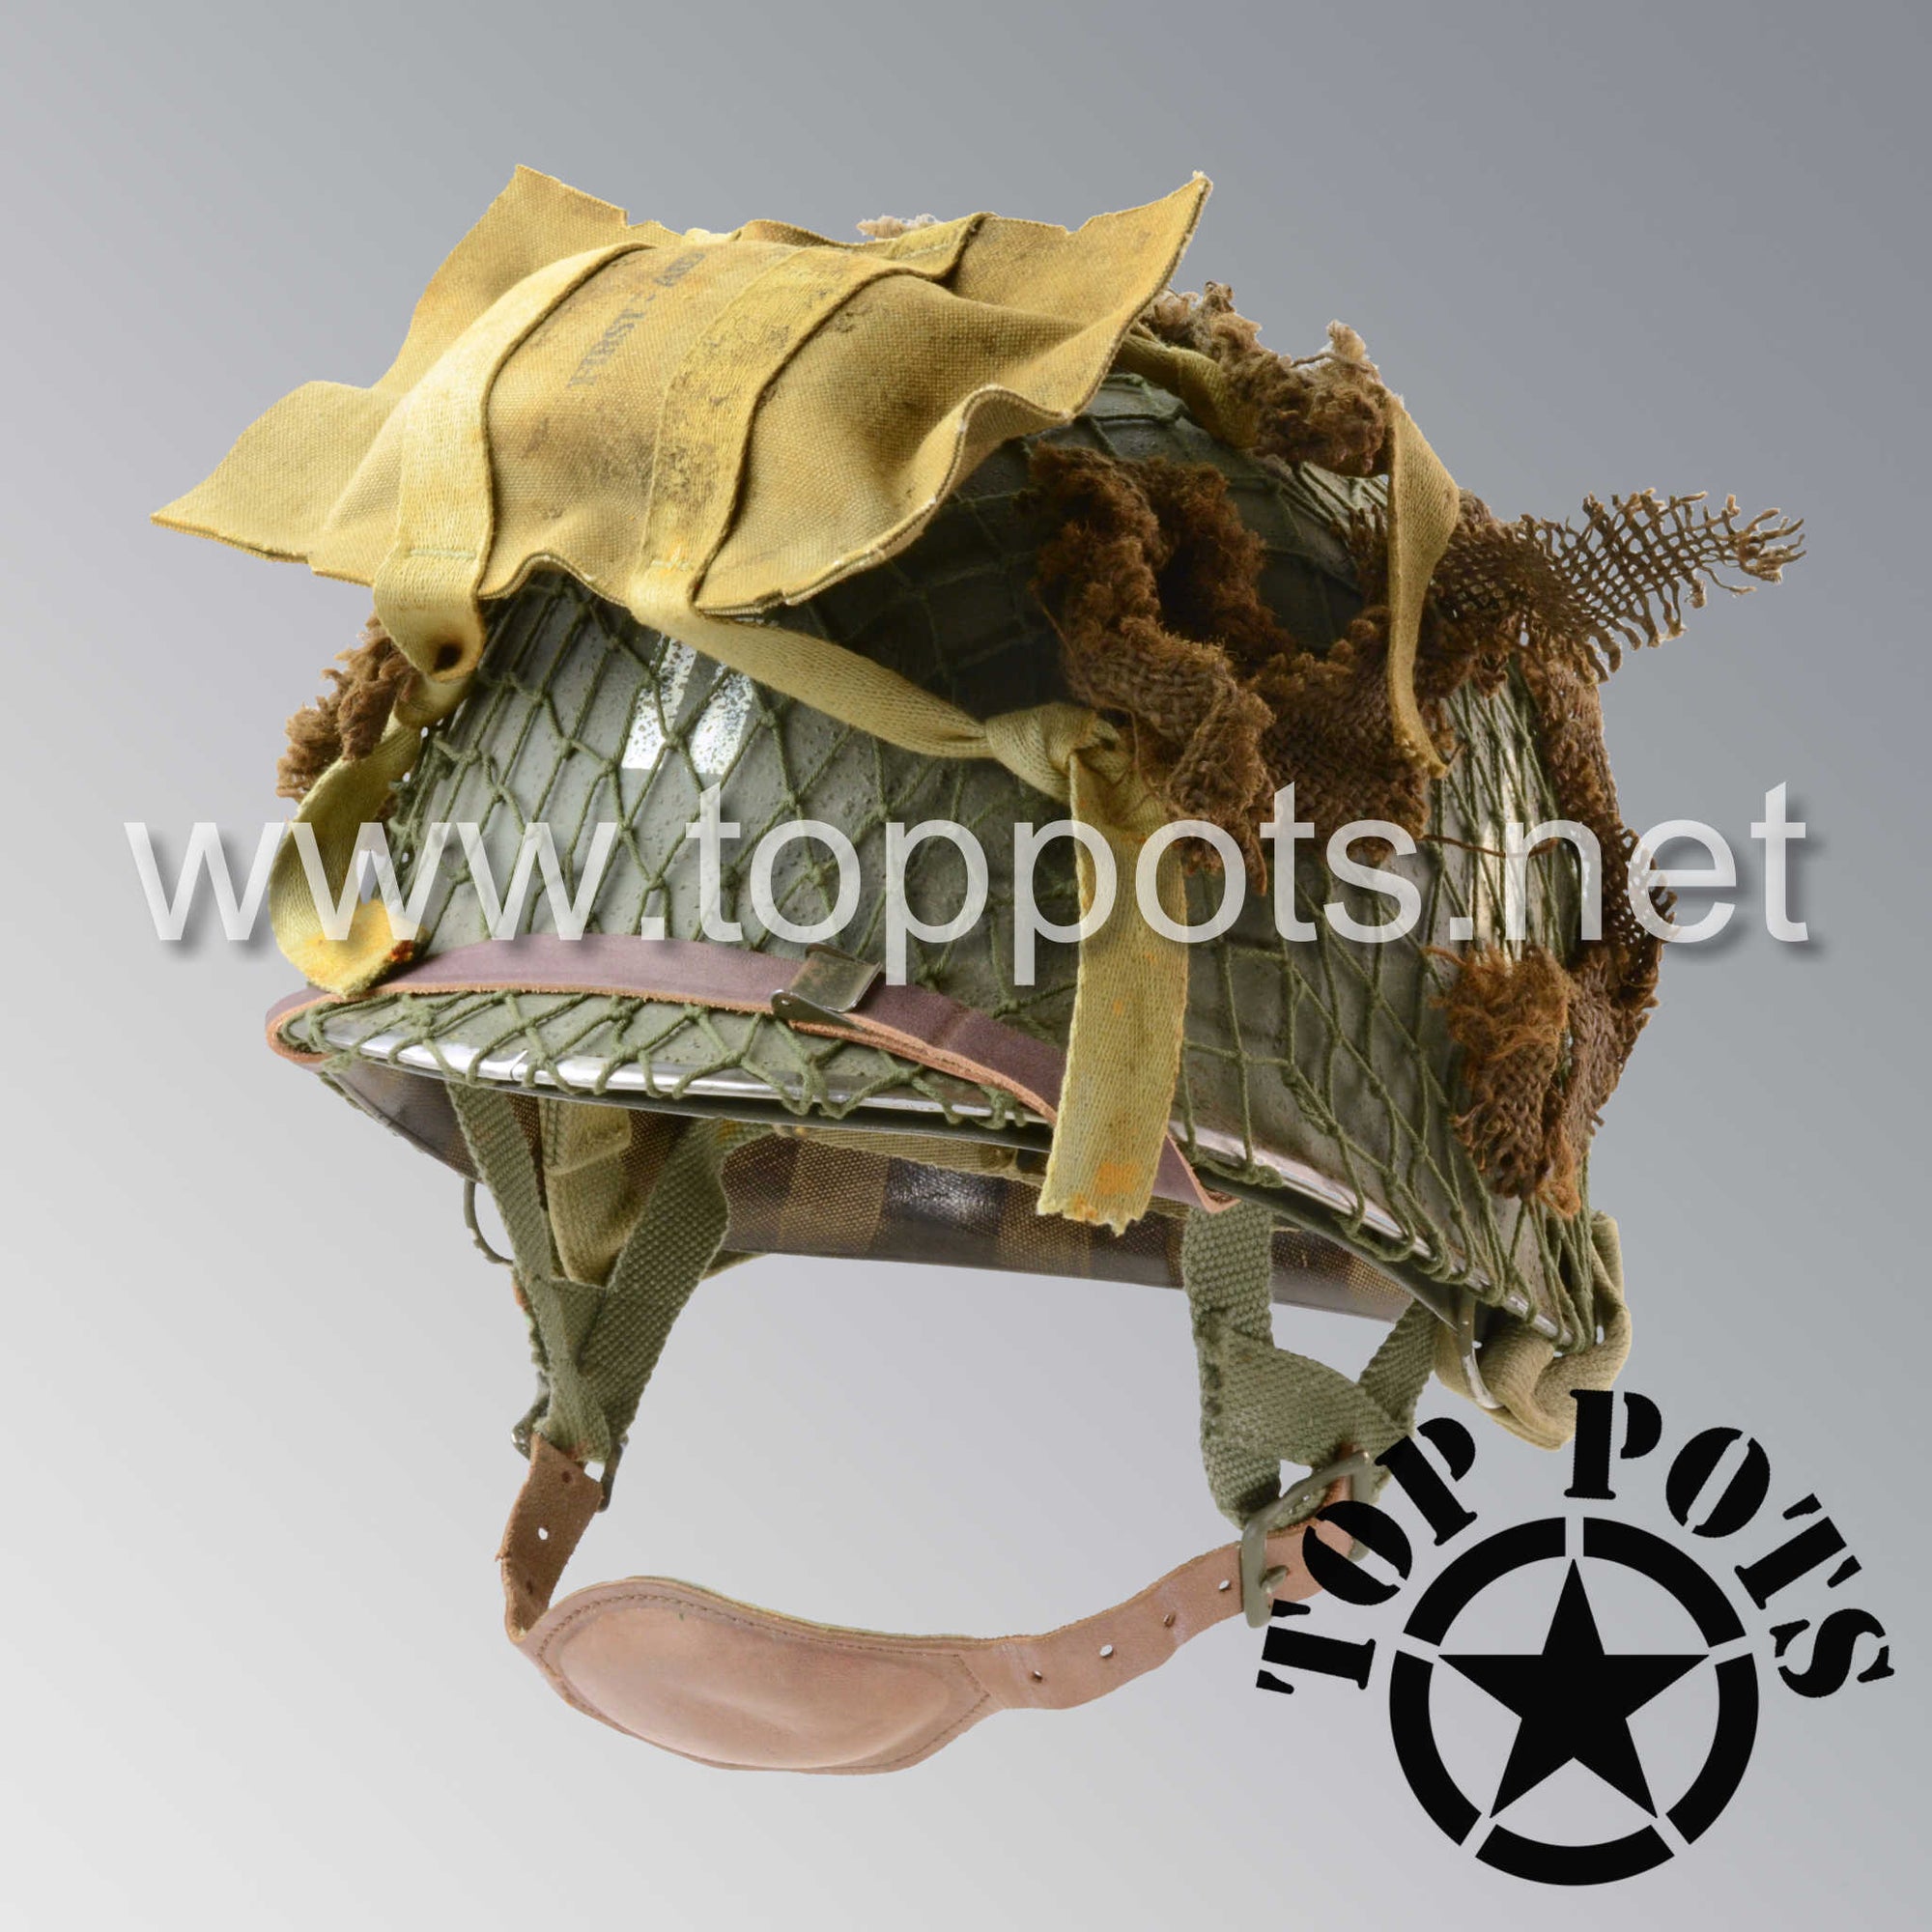 WWII US Army Aged Original M1C Paratrooper Airborne Helmet Swivel Bale Shell and Liner with 506th 2nd Battalion PIR Emblem, Net, Medic Pack and Scrim